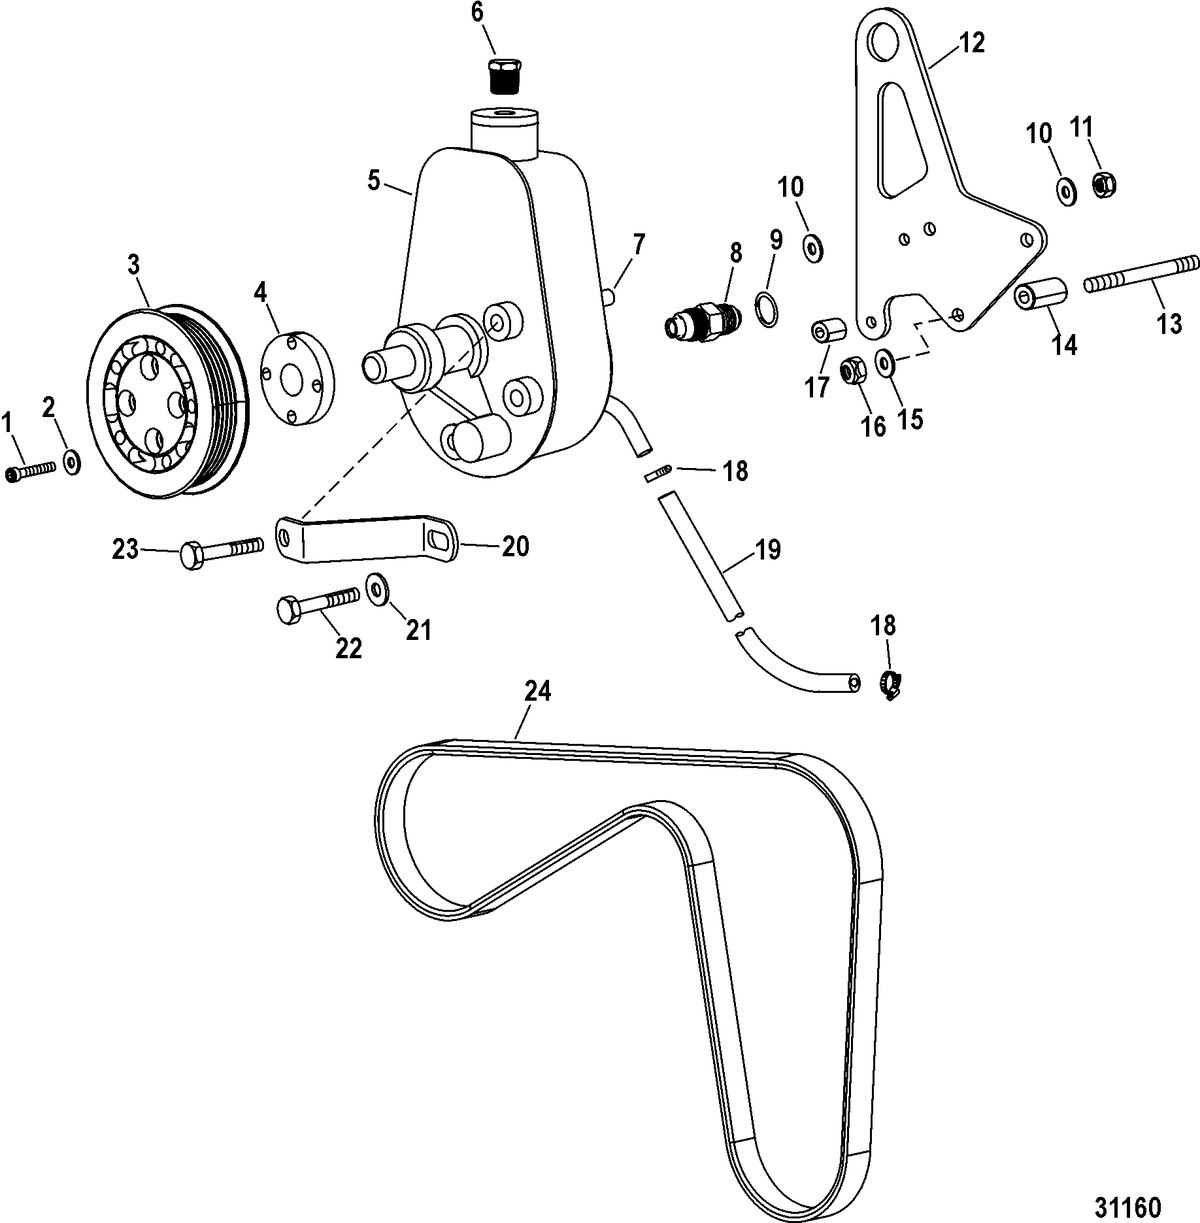 RACE STERNDRIVE 850 SCI Power-Assisted Steering Components(Design I)